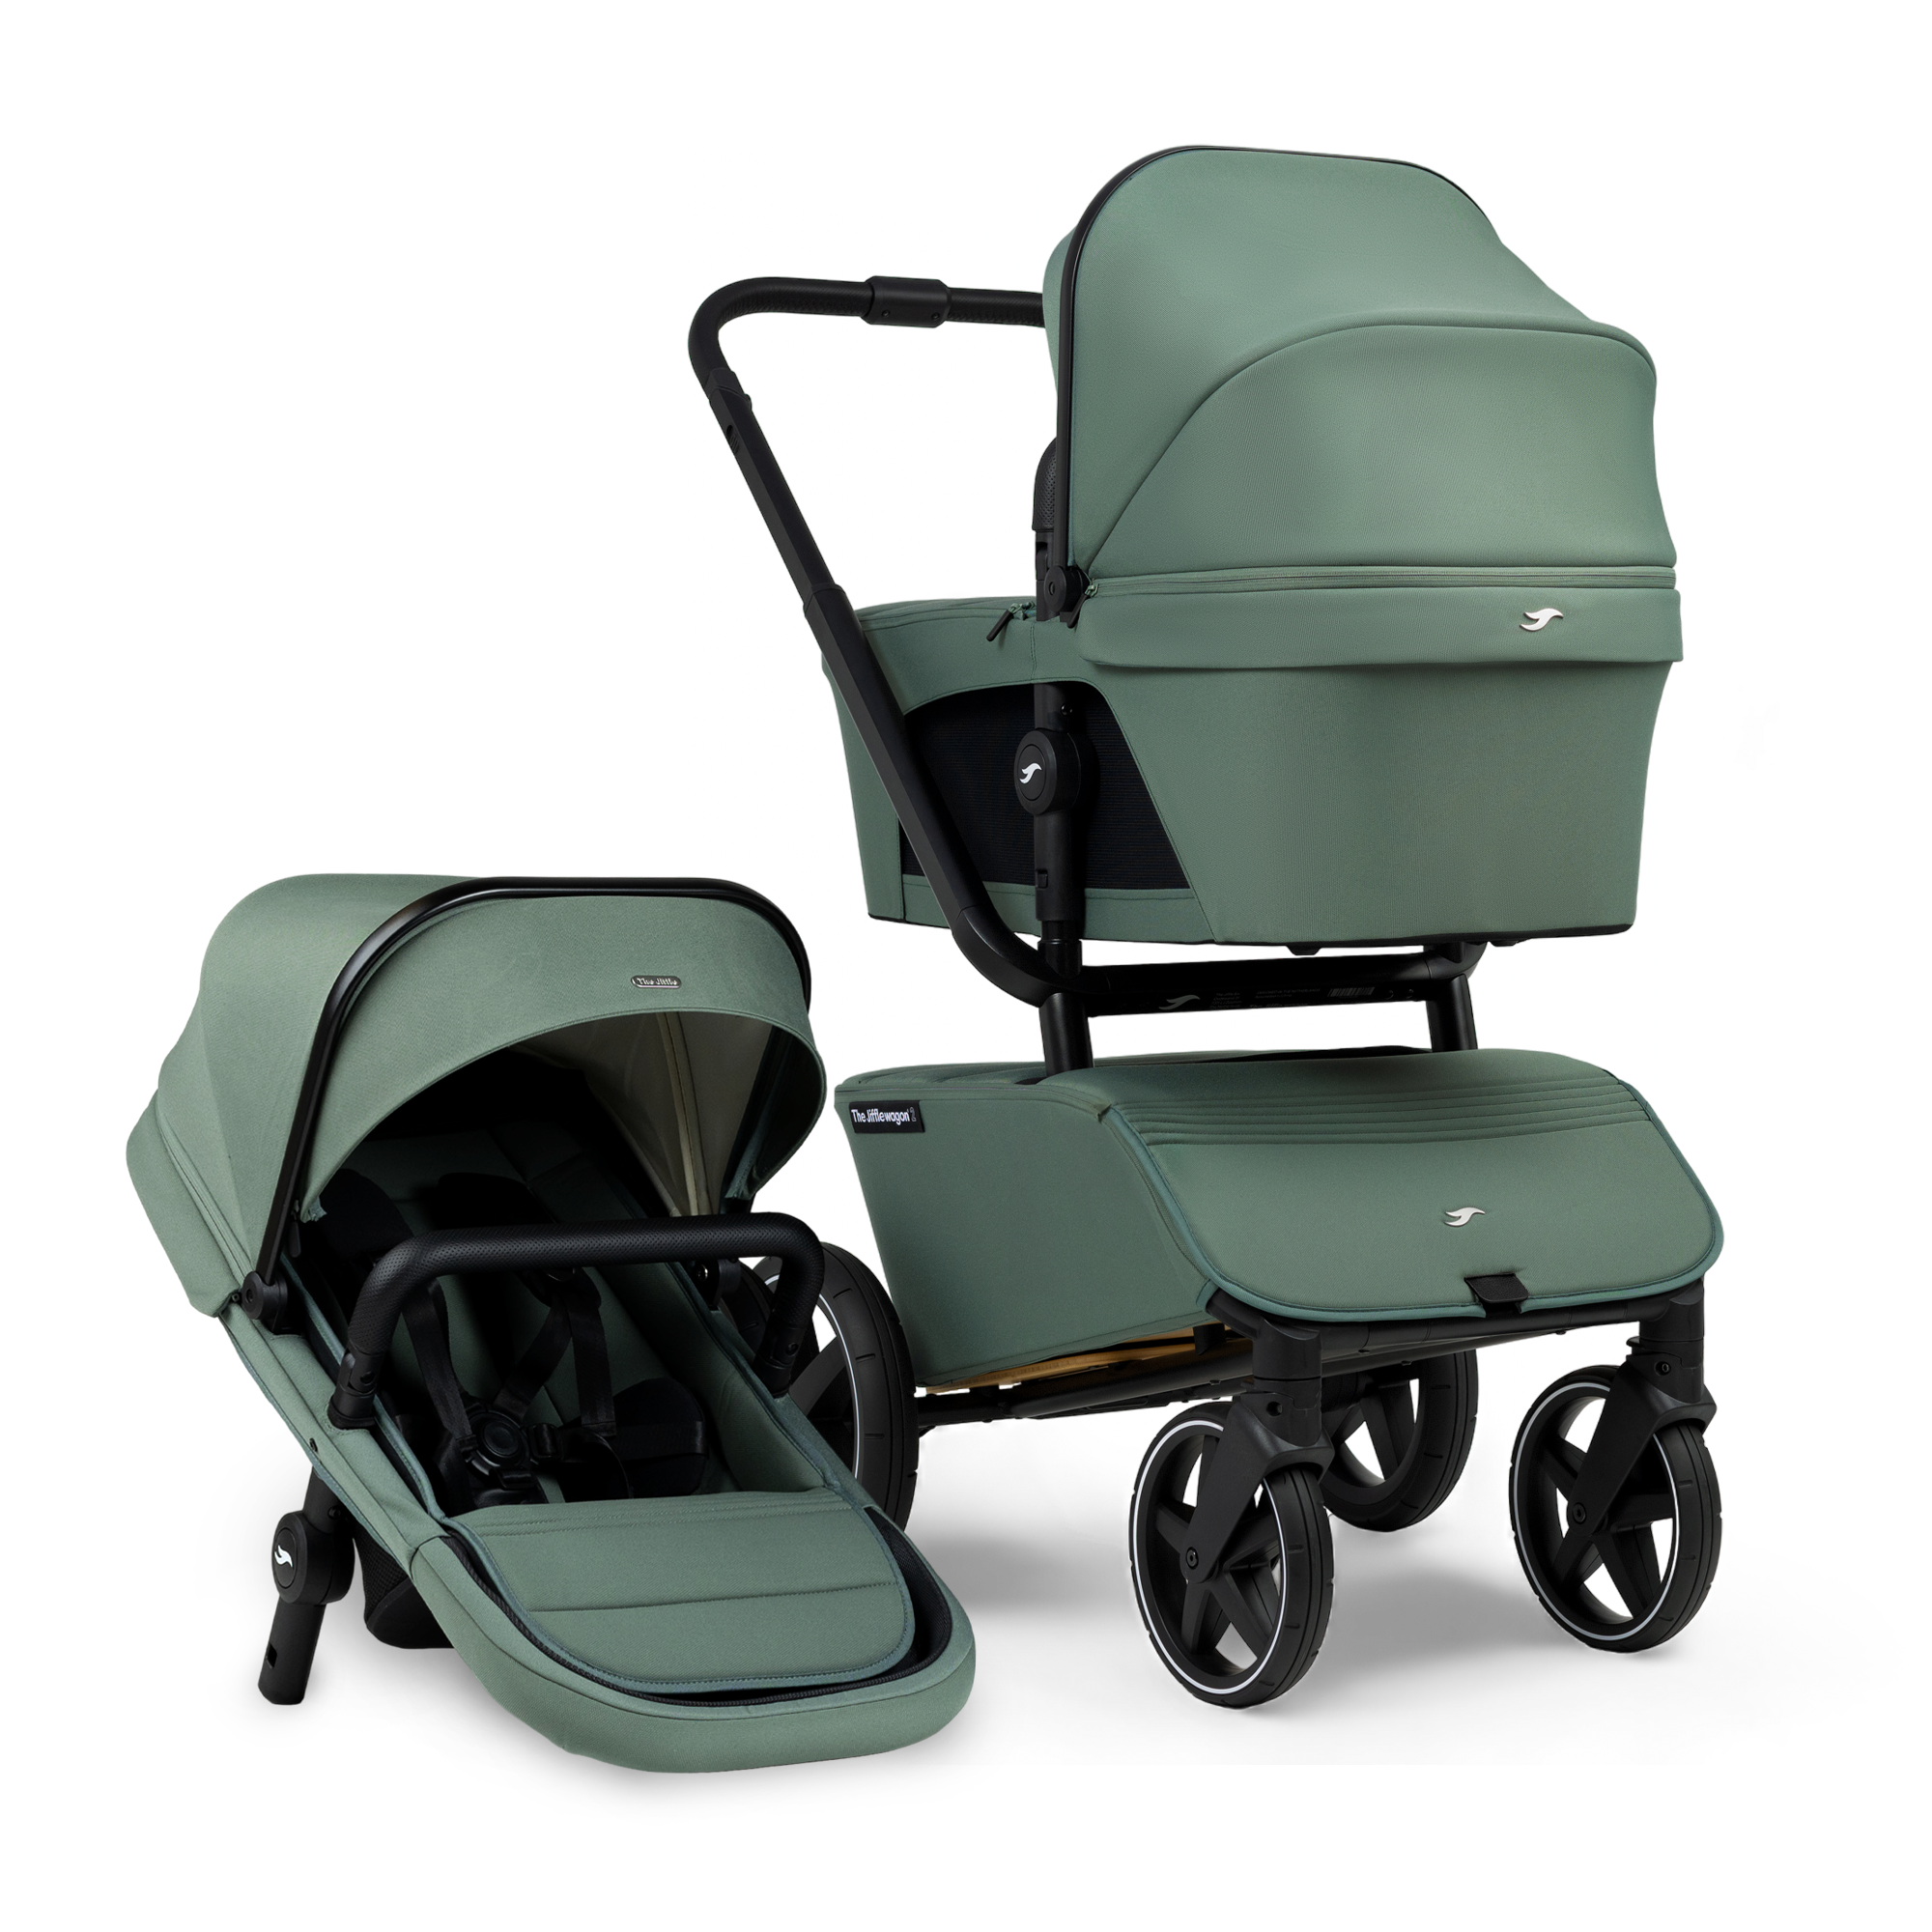 The Jiffle Wagon 6 in 1 With Second Seat , Insect Net , Rain Cover, Foot muff, Adapt more & adapters ( sale Ends 01 May) - Tiny Tots Baby Store 